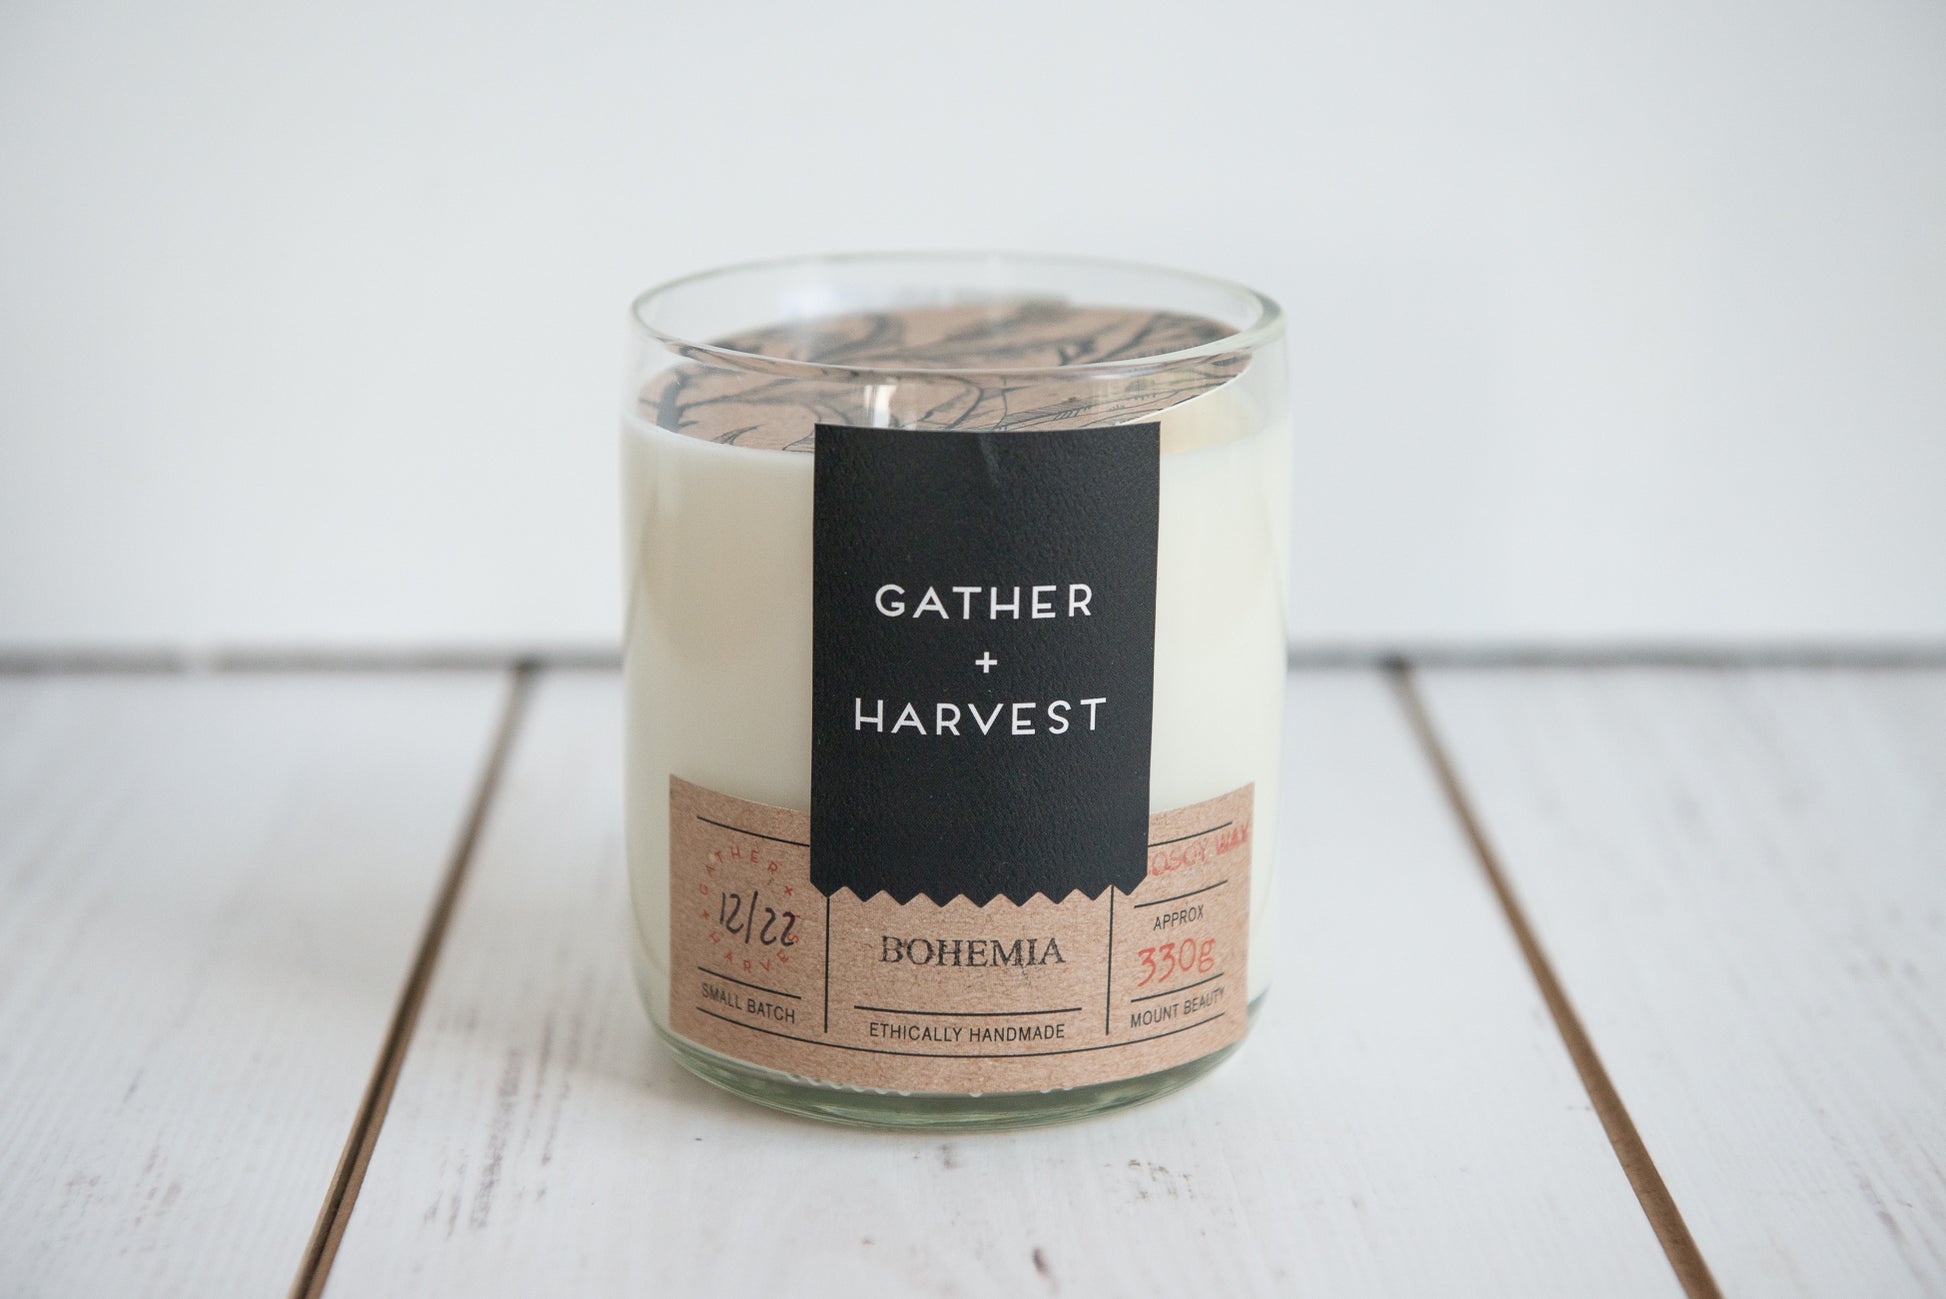 The handmade Bohemia CocoSoy candle is ethically made in Mt Beauty as part of a small batch